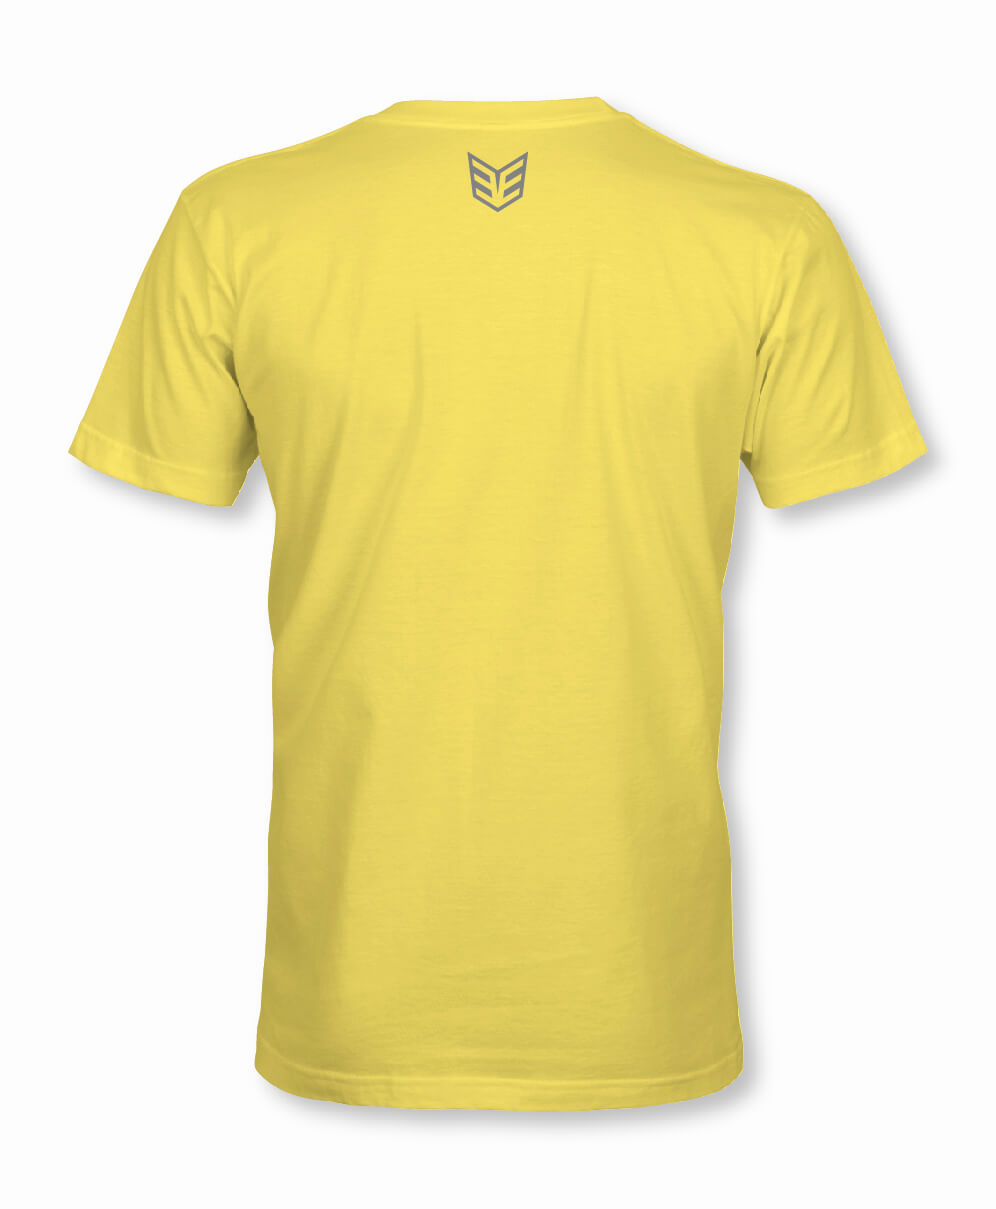 ENVY ELEVEN SURF SHOP TEE - YELLOW